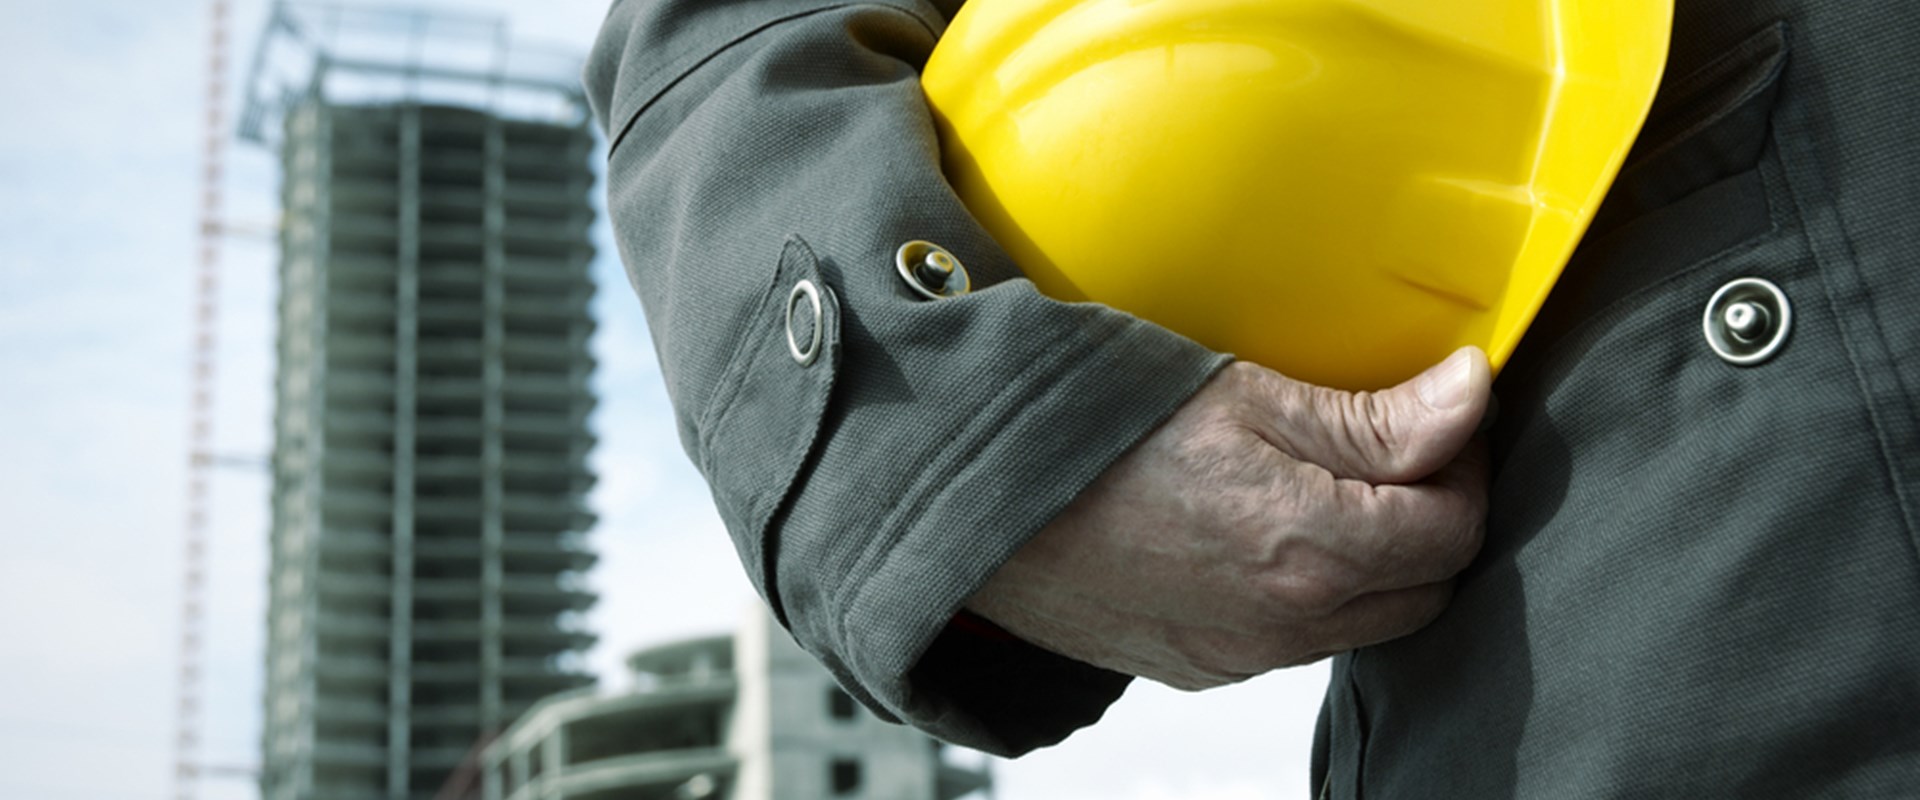 Engineer holding a helmet for workers security on background of building construction